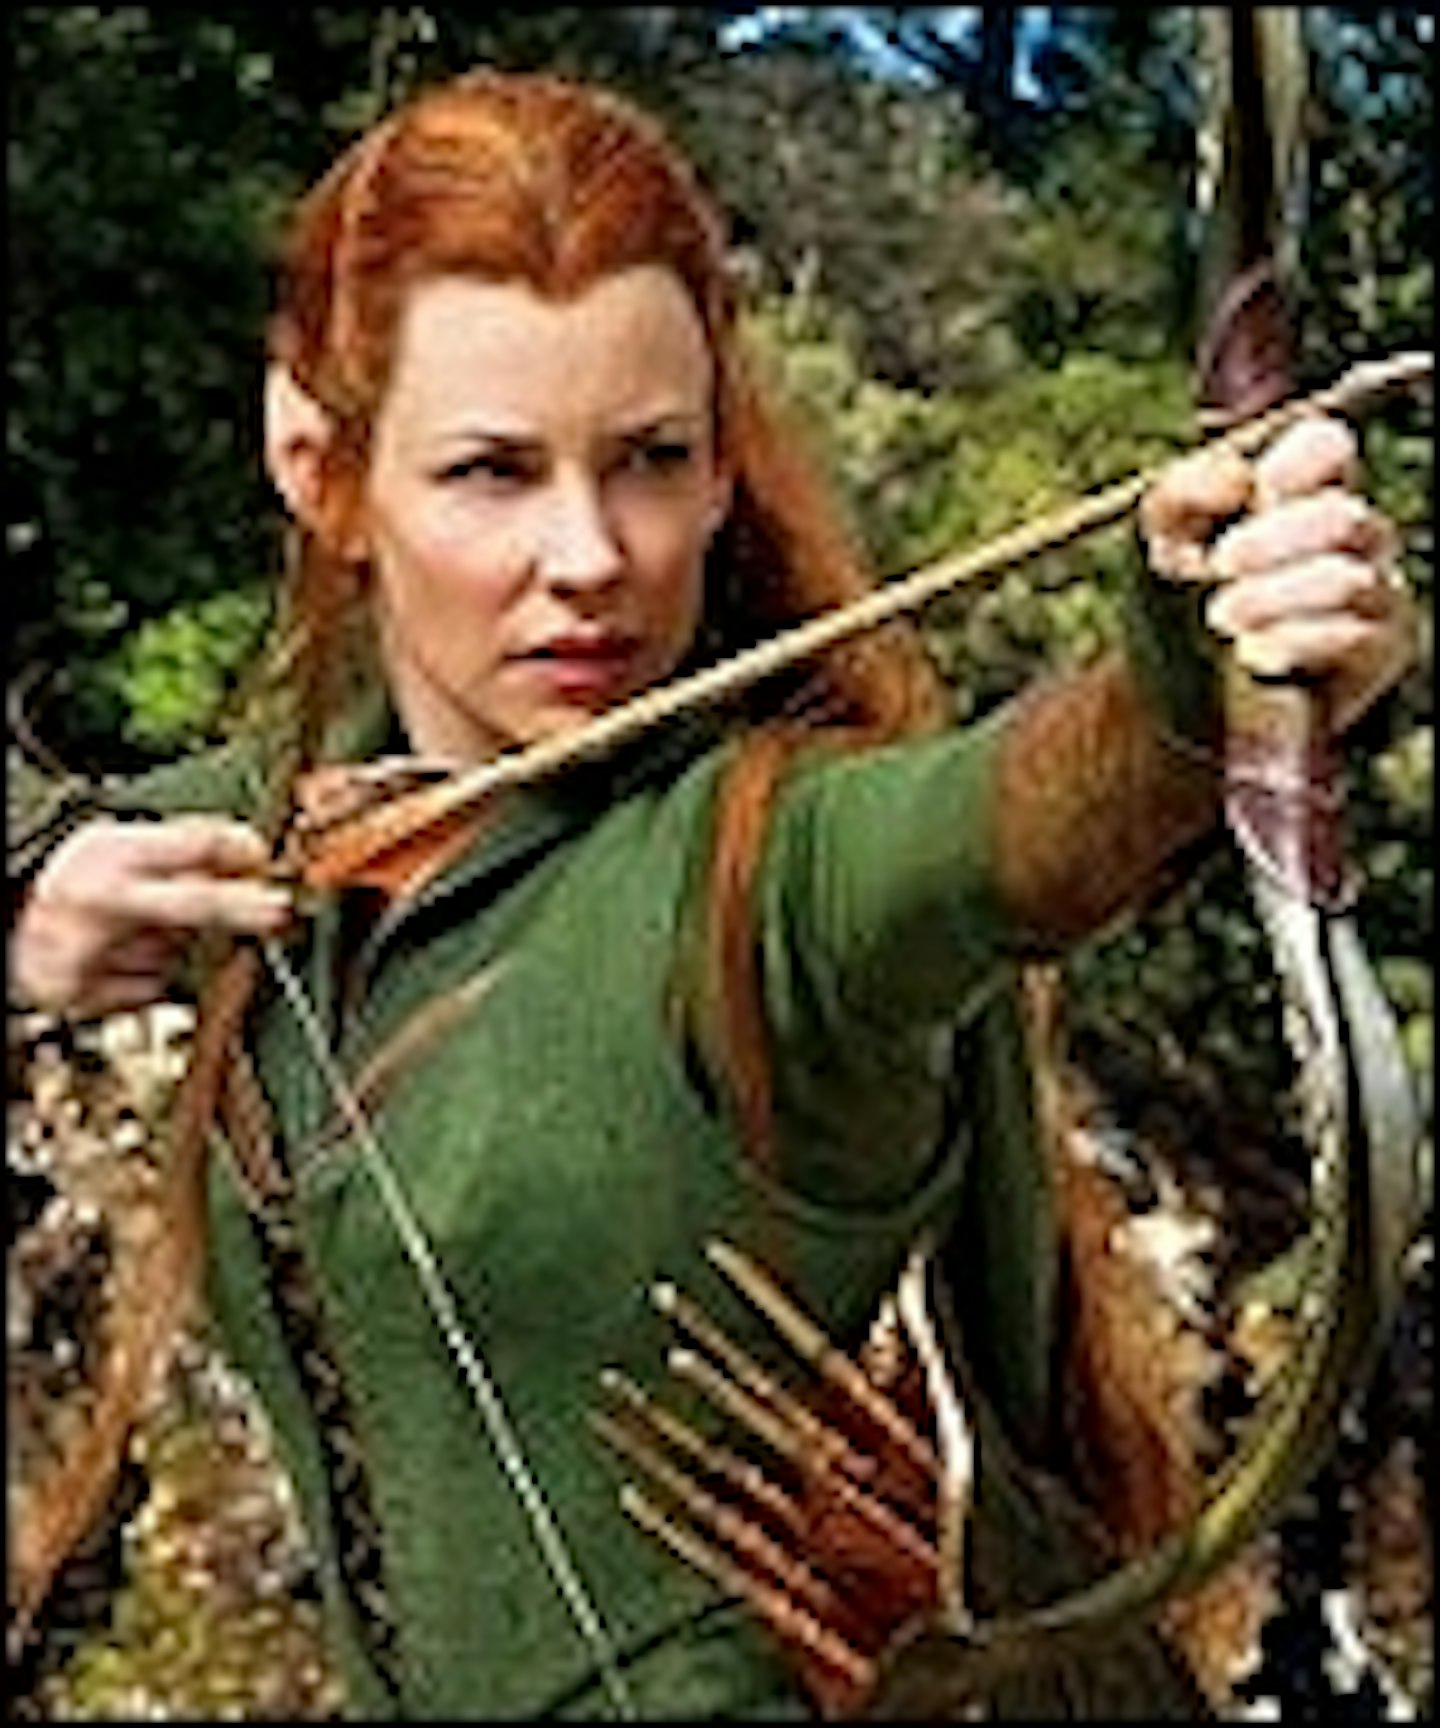 A New Image Of Evangeline Lilly's Elf Tauriel Arrives